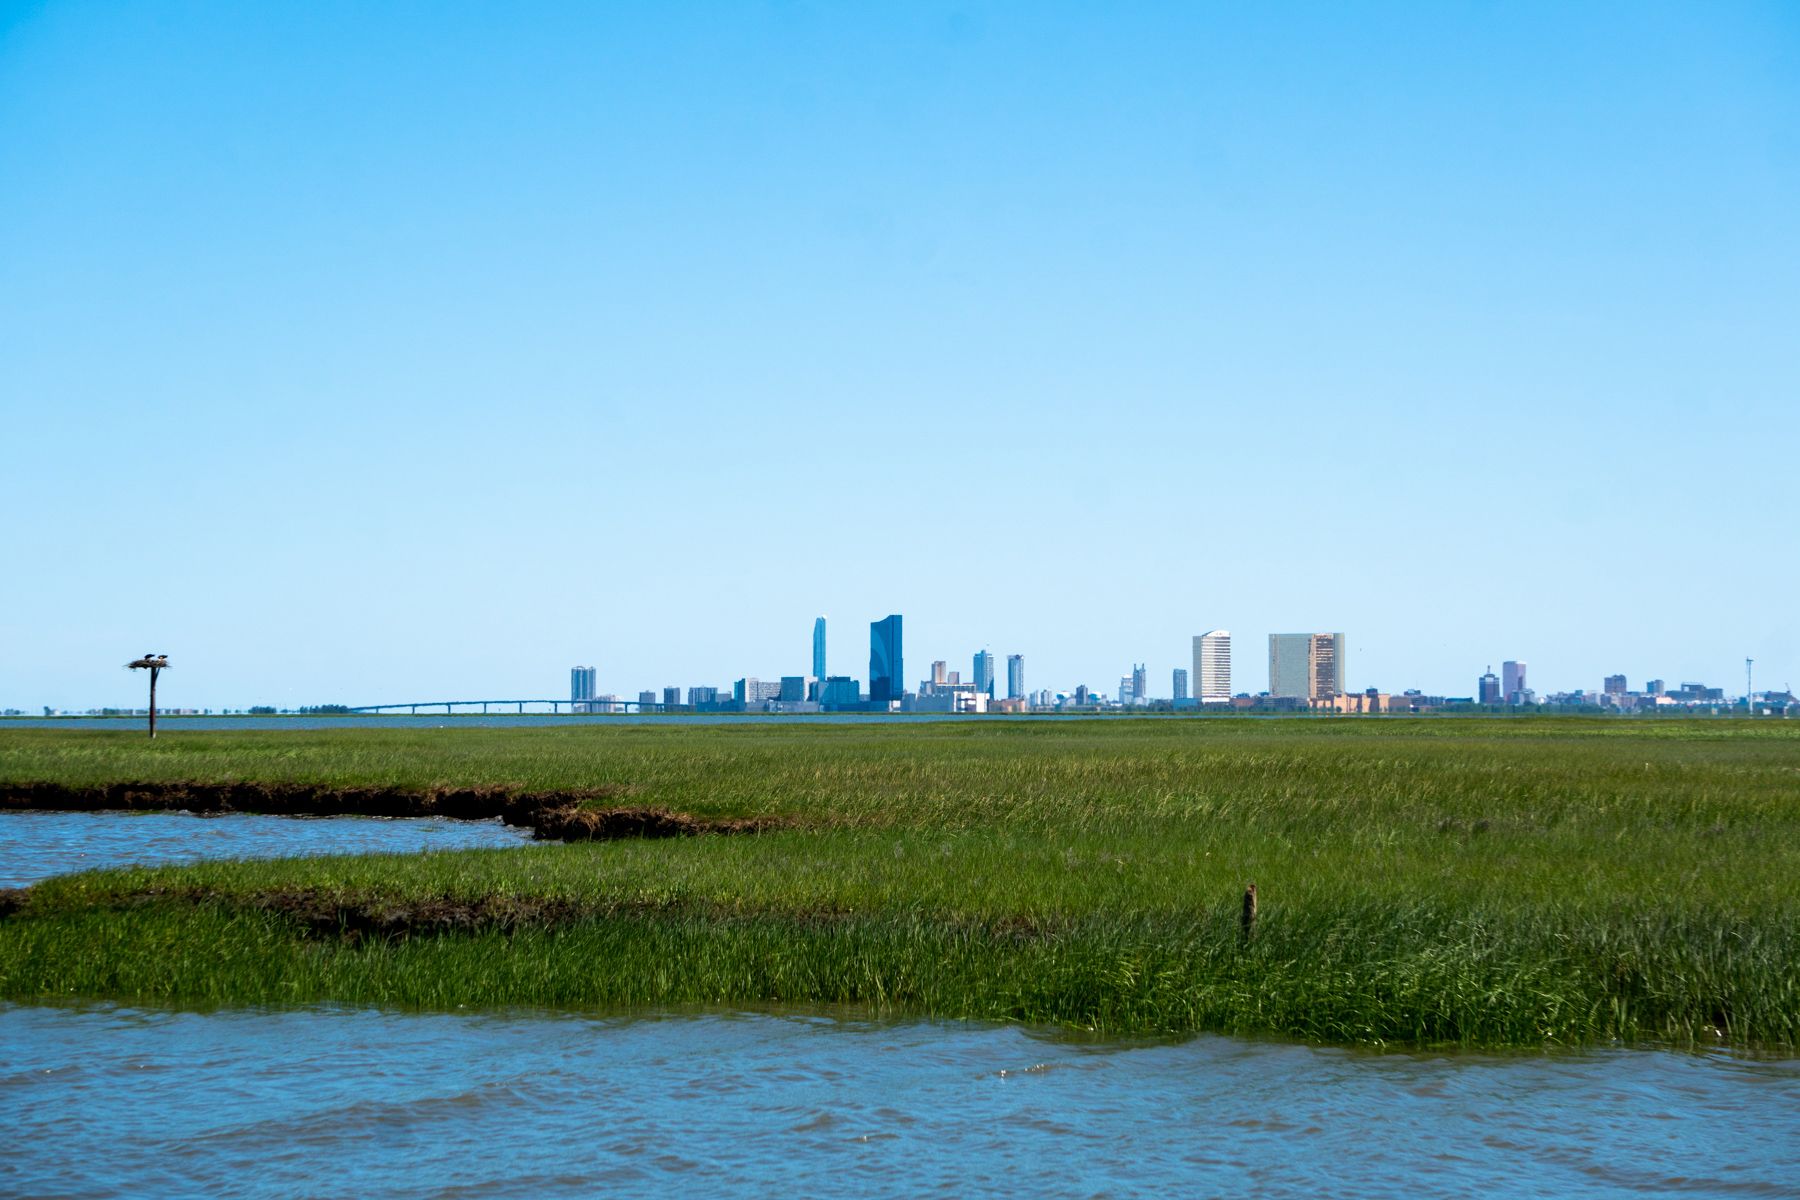 A wider view of the Atlantic City skyline with an osprey nest on the left corner with two ospreys occupying it